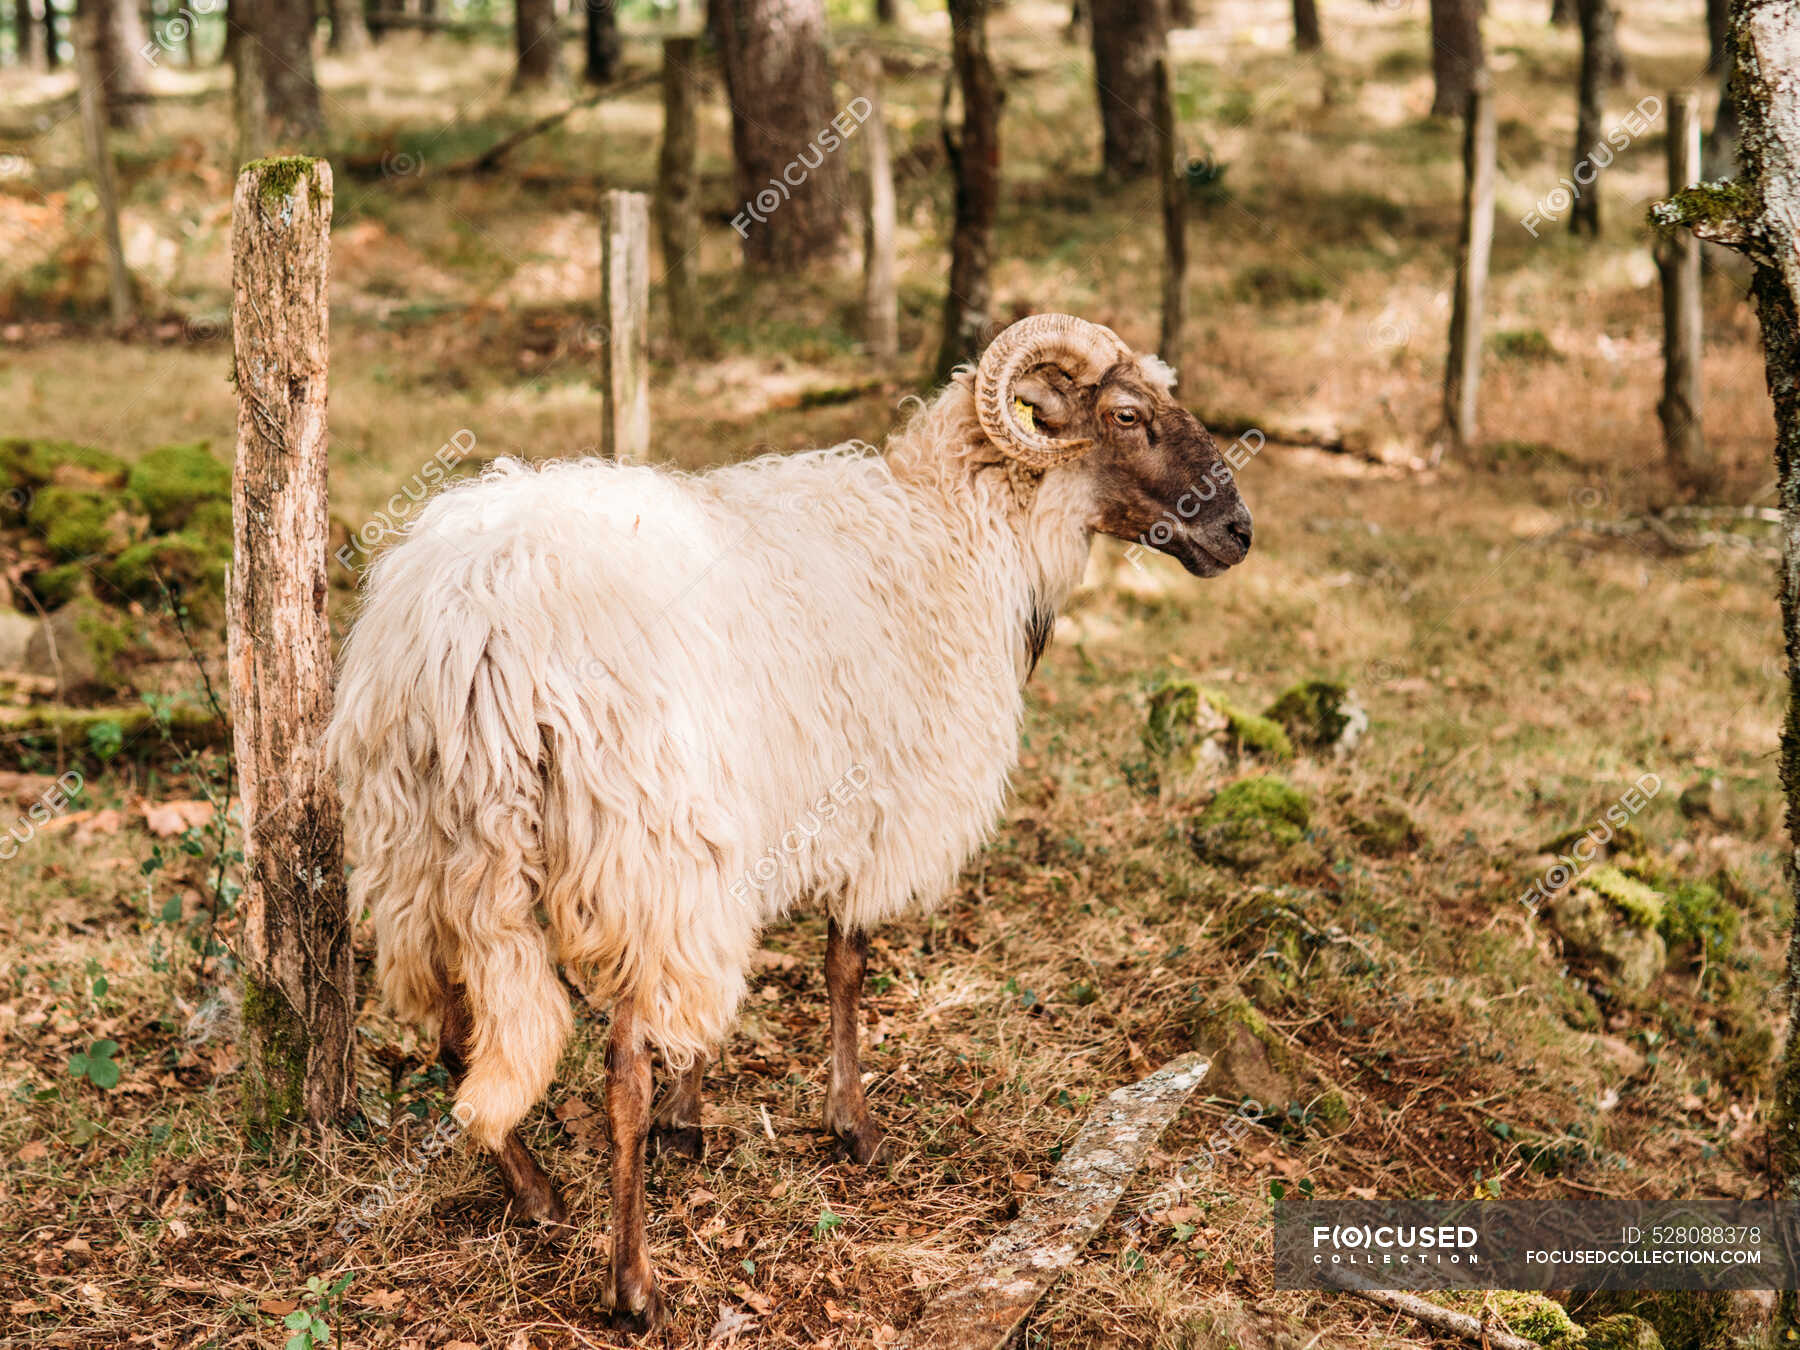 Side view of purebred sheep with curly horns and fluffy fur grazing on dry  grassy meadow in farmyard — calm, agriculture - Stock Photo | #528088378